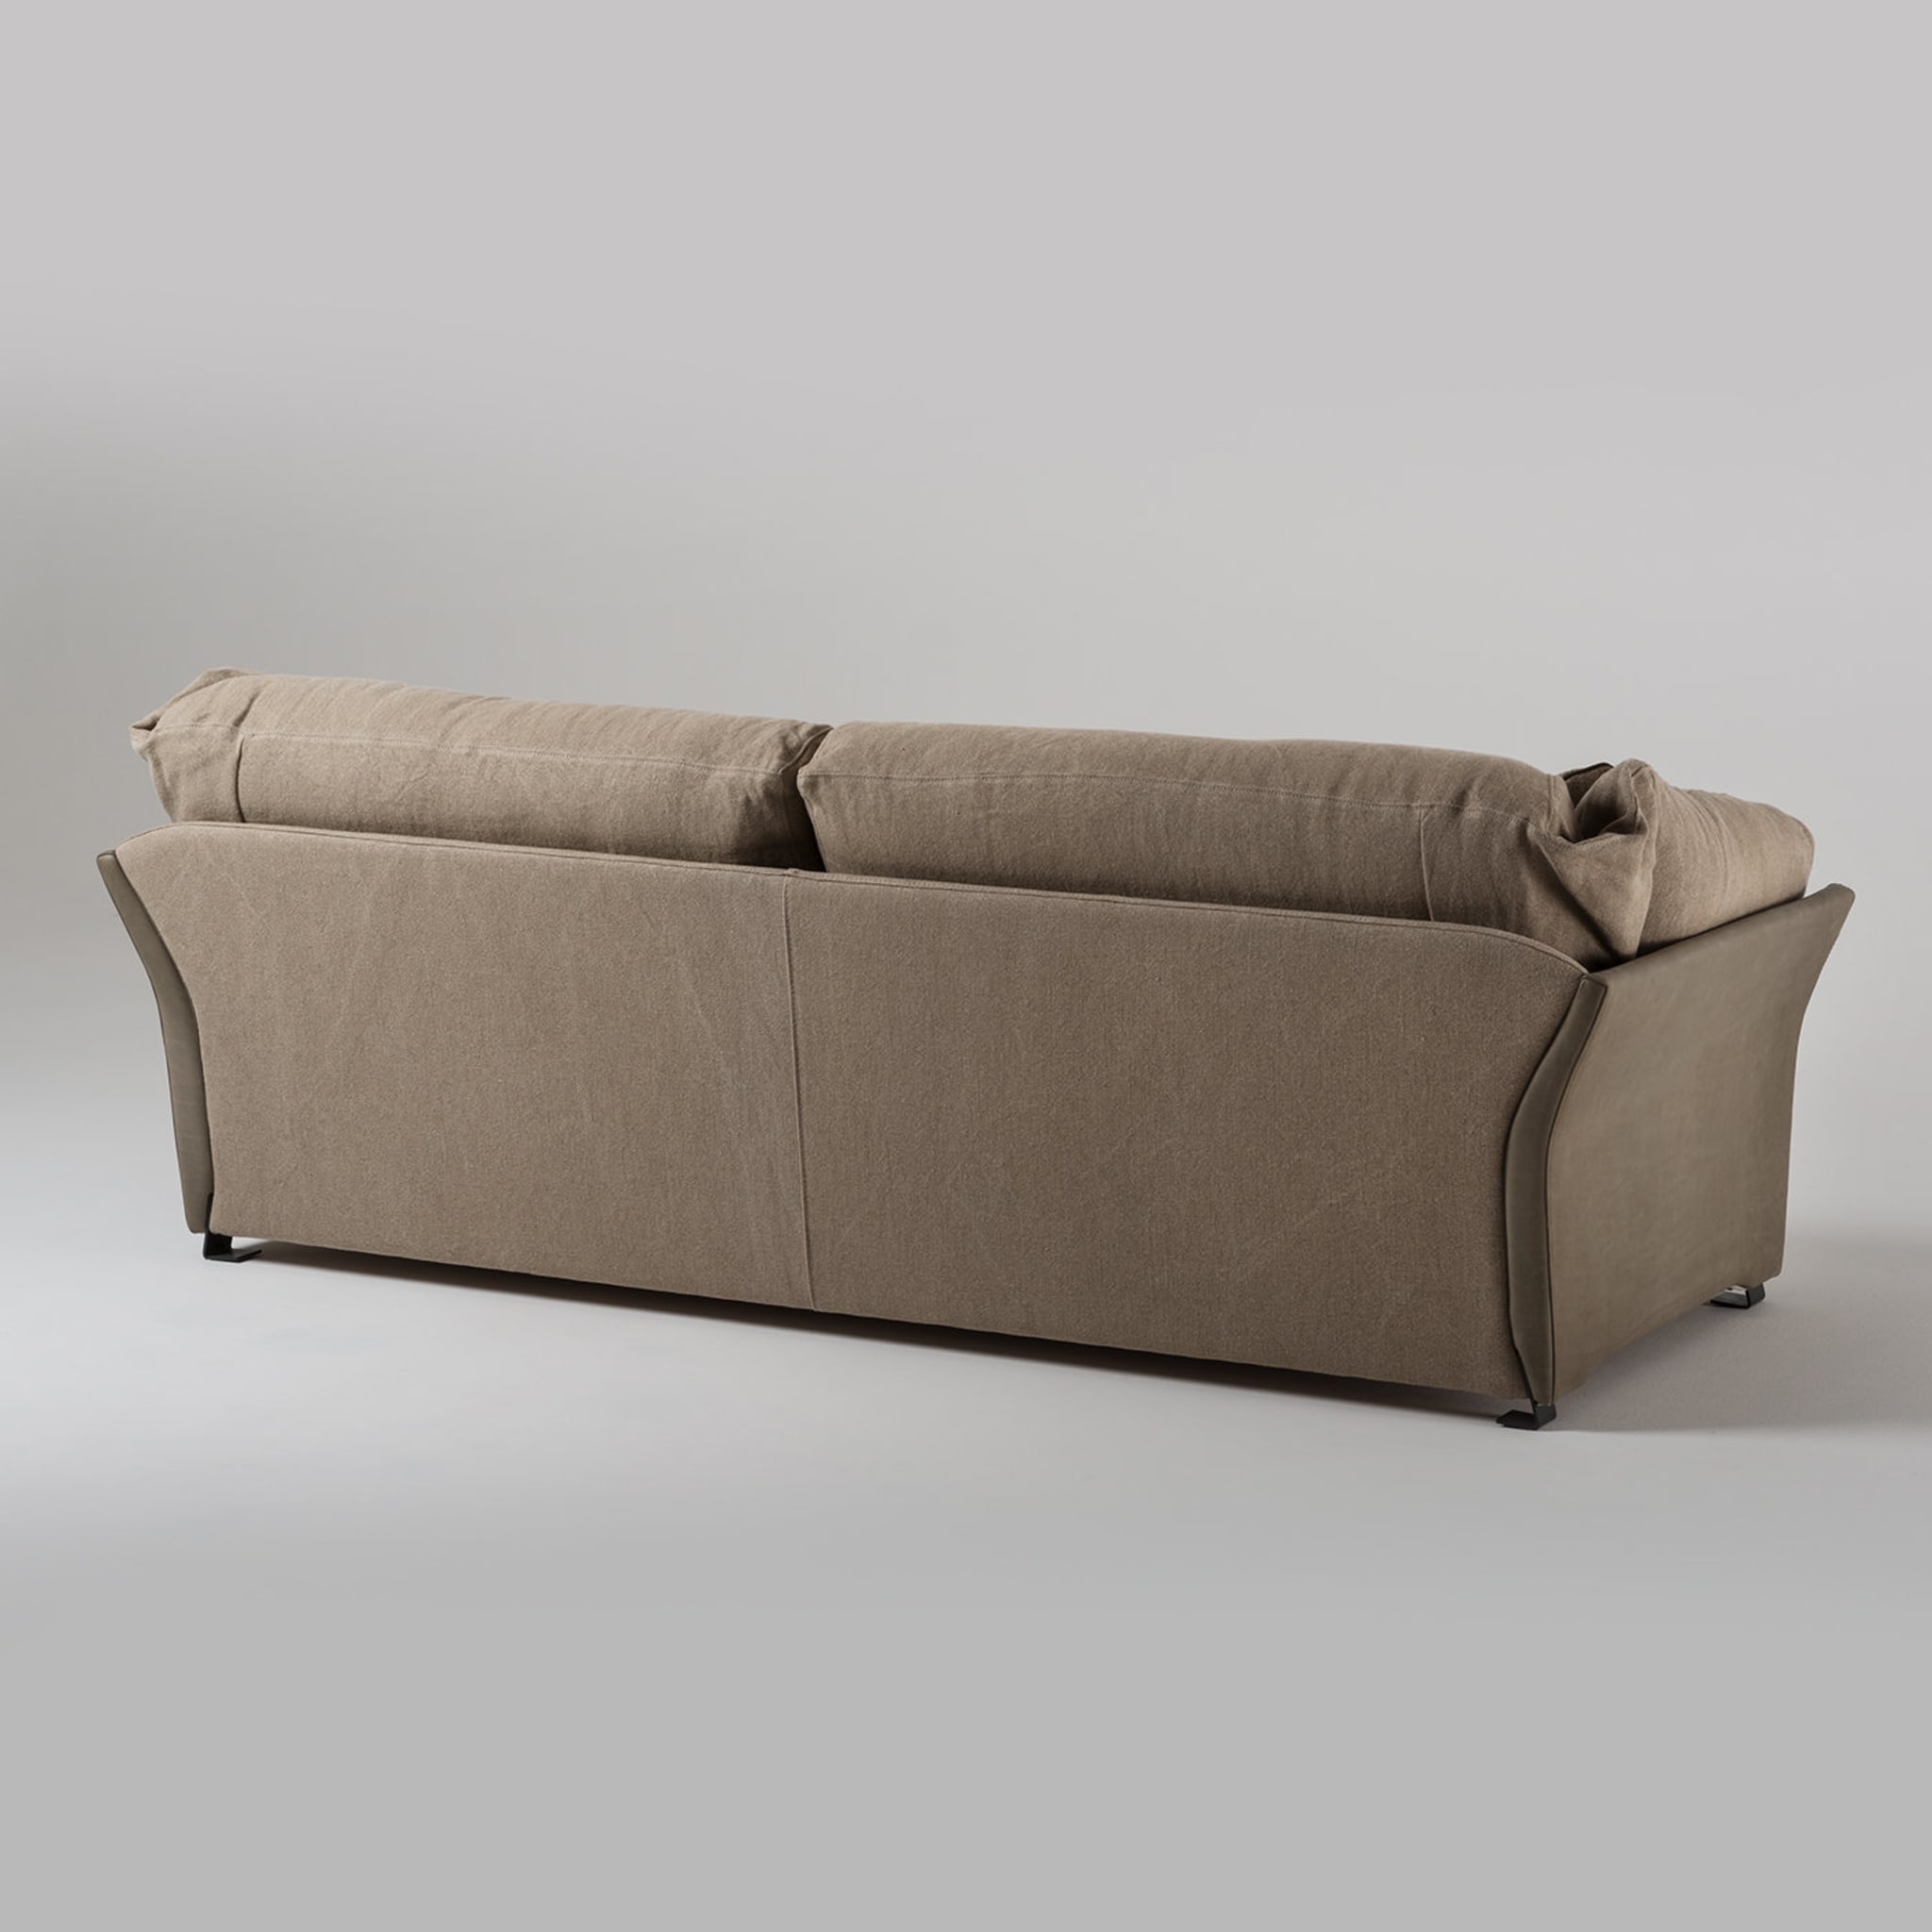 Paco 3-Seater Sofa Tribeca Collection by Marco and Giulio Mantellassi  - Alternative view 1